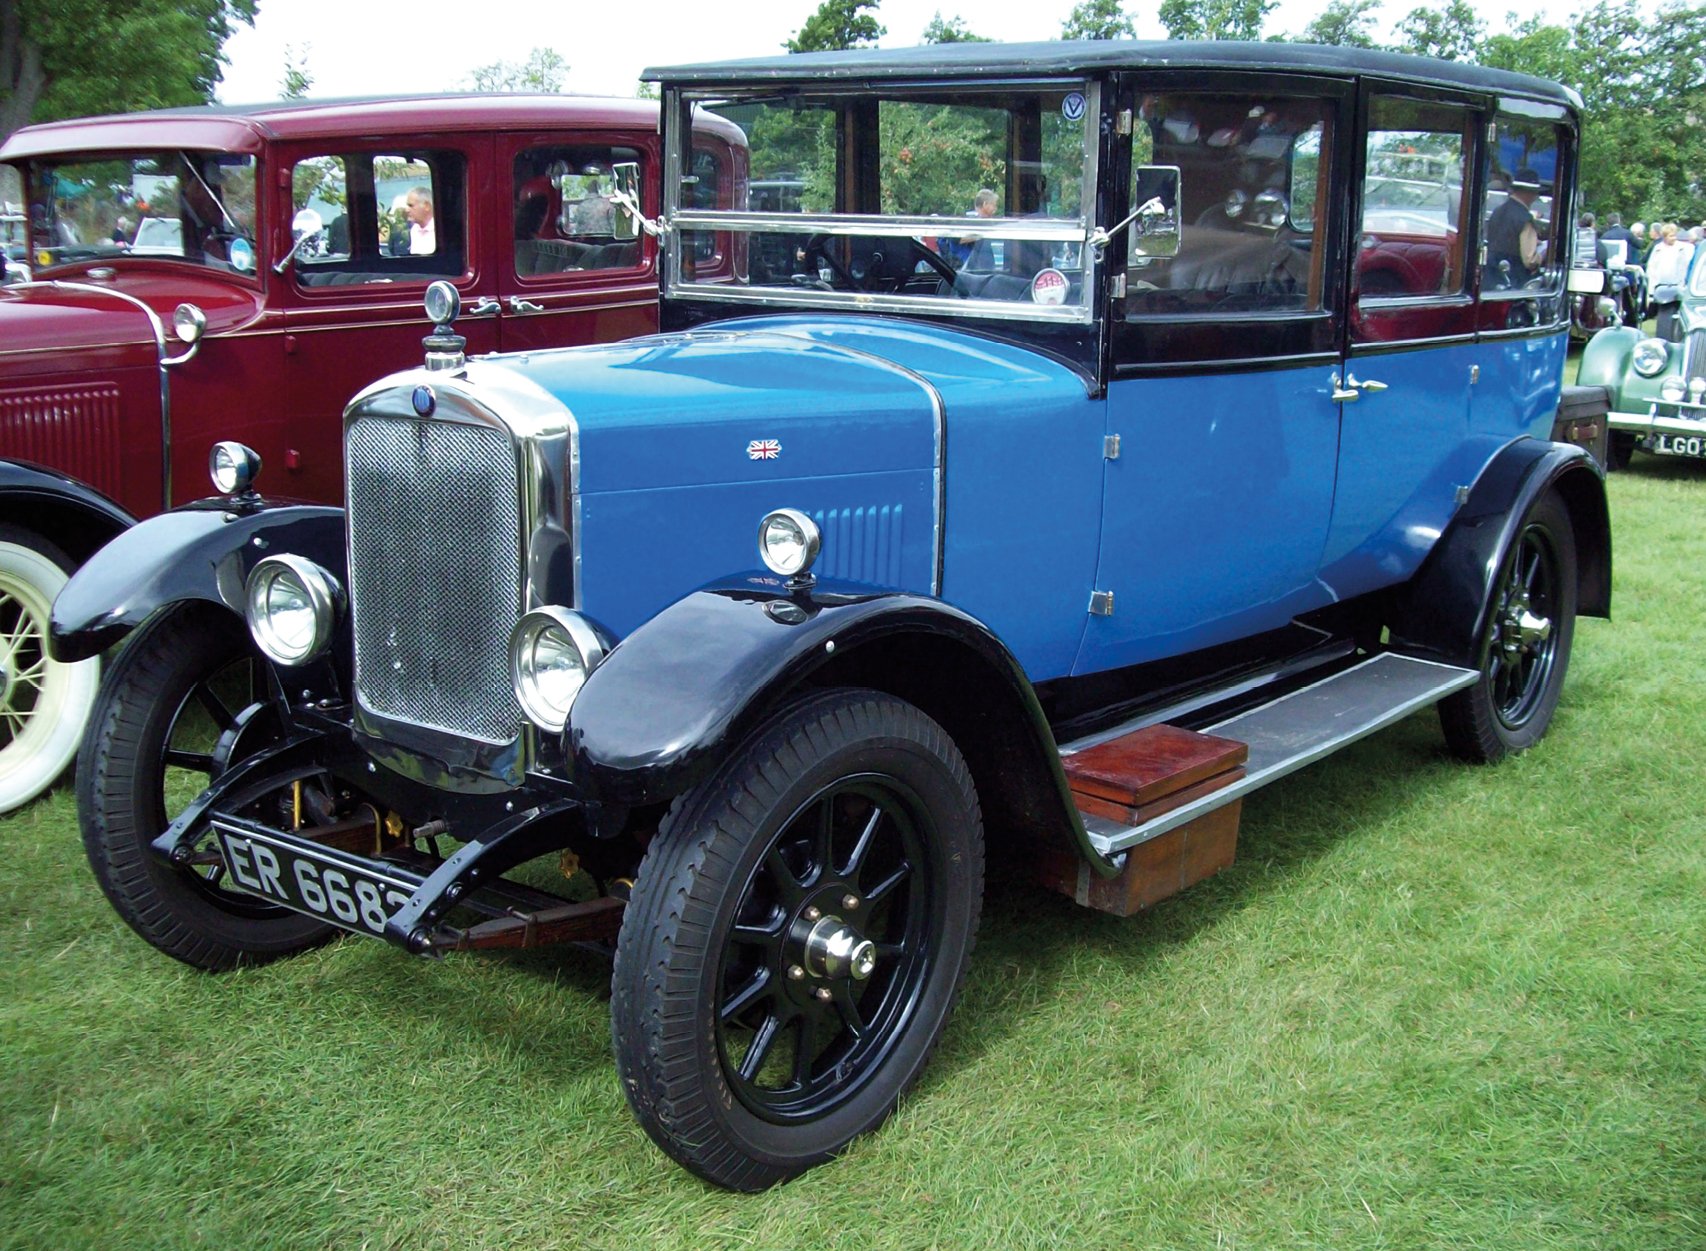 The Hillman Fourteen was a success for the company in the 1920s This 1926 - photo 5